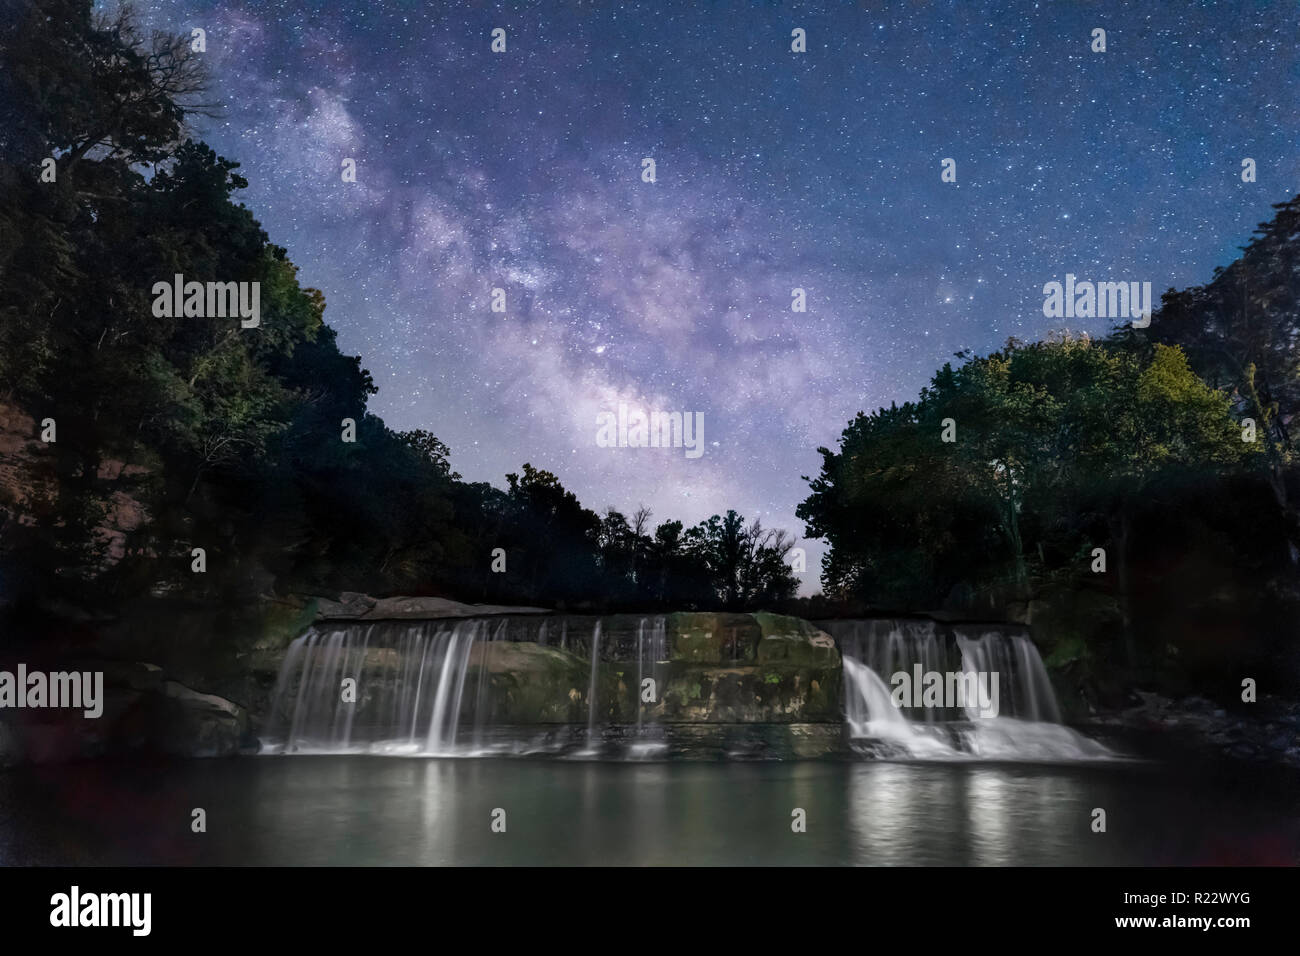 The Milky Way shines brightly in the dark rural Indiana sky over Owen County, Indiana's Upper Cataract Falls. Stock Photo